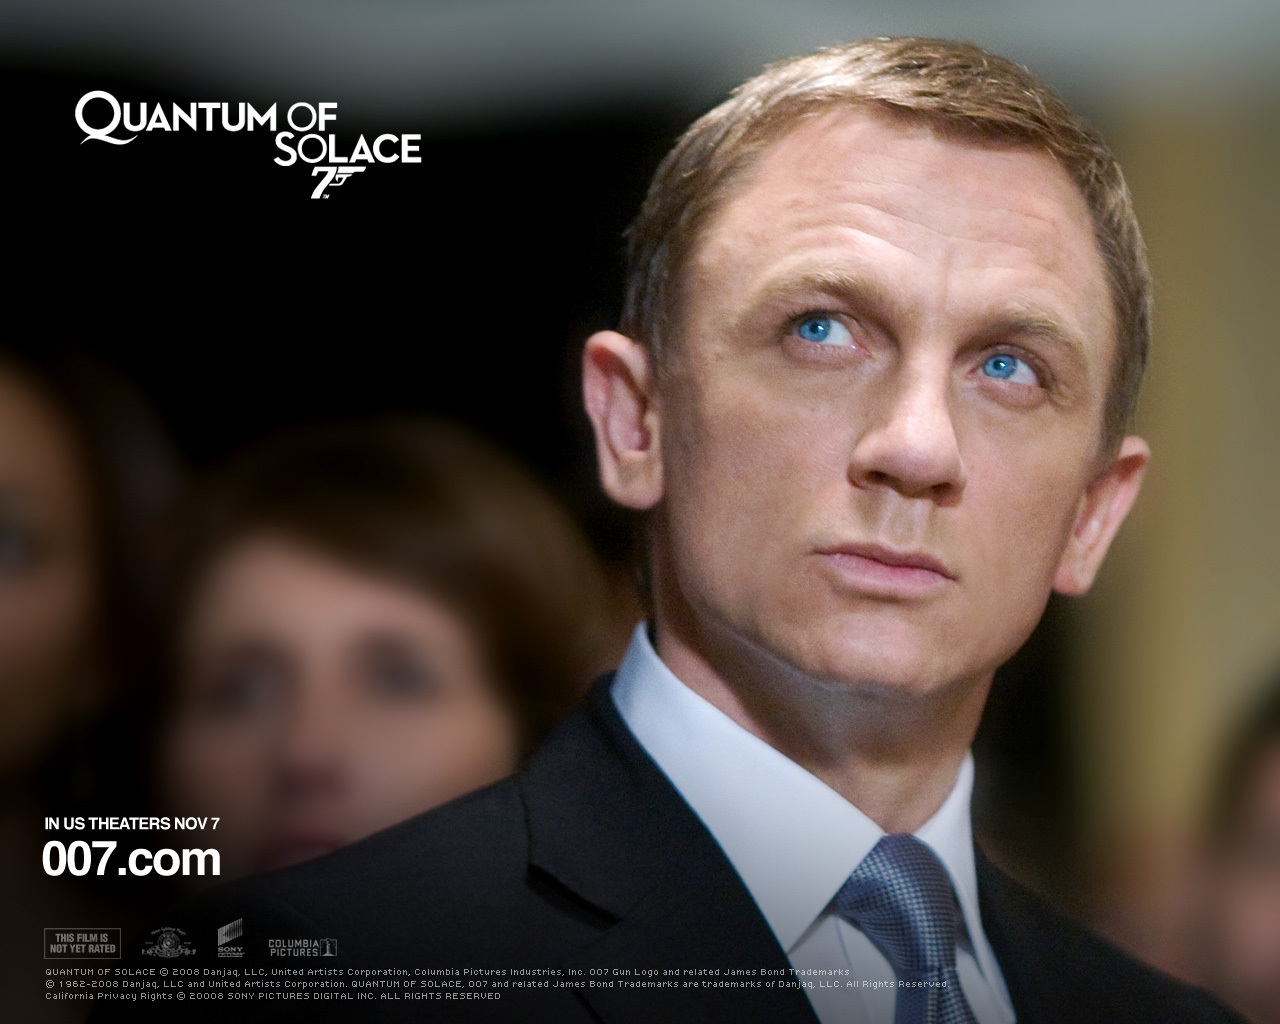 James Bond Image Quantum Of Solace HD Wallpaper And Background